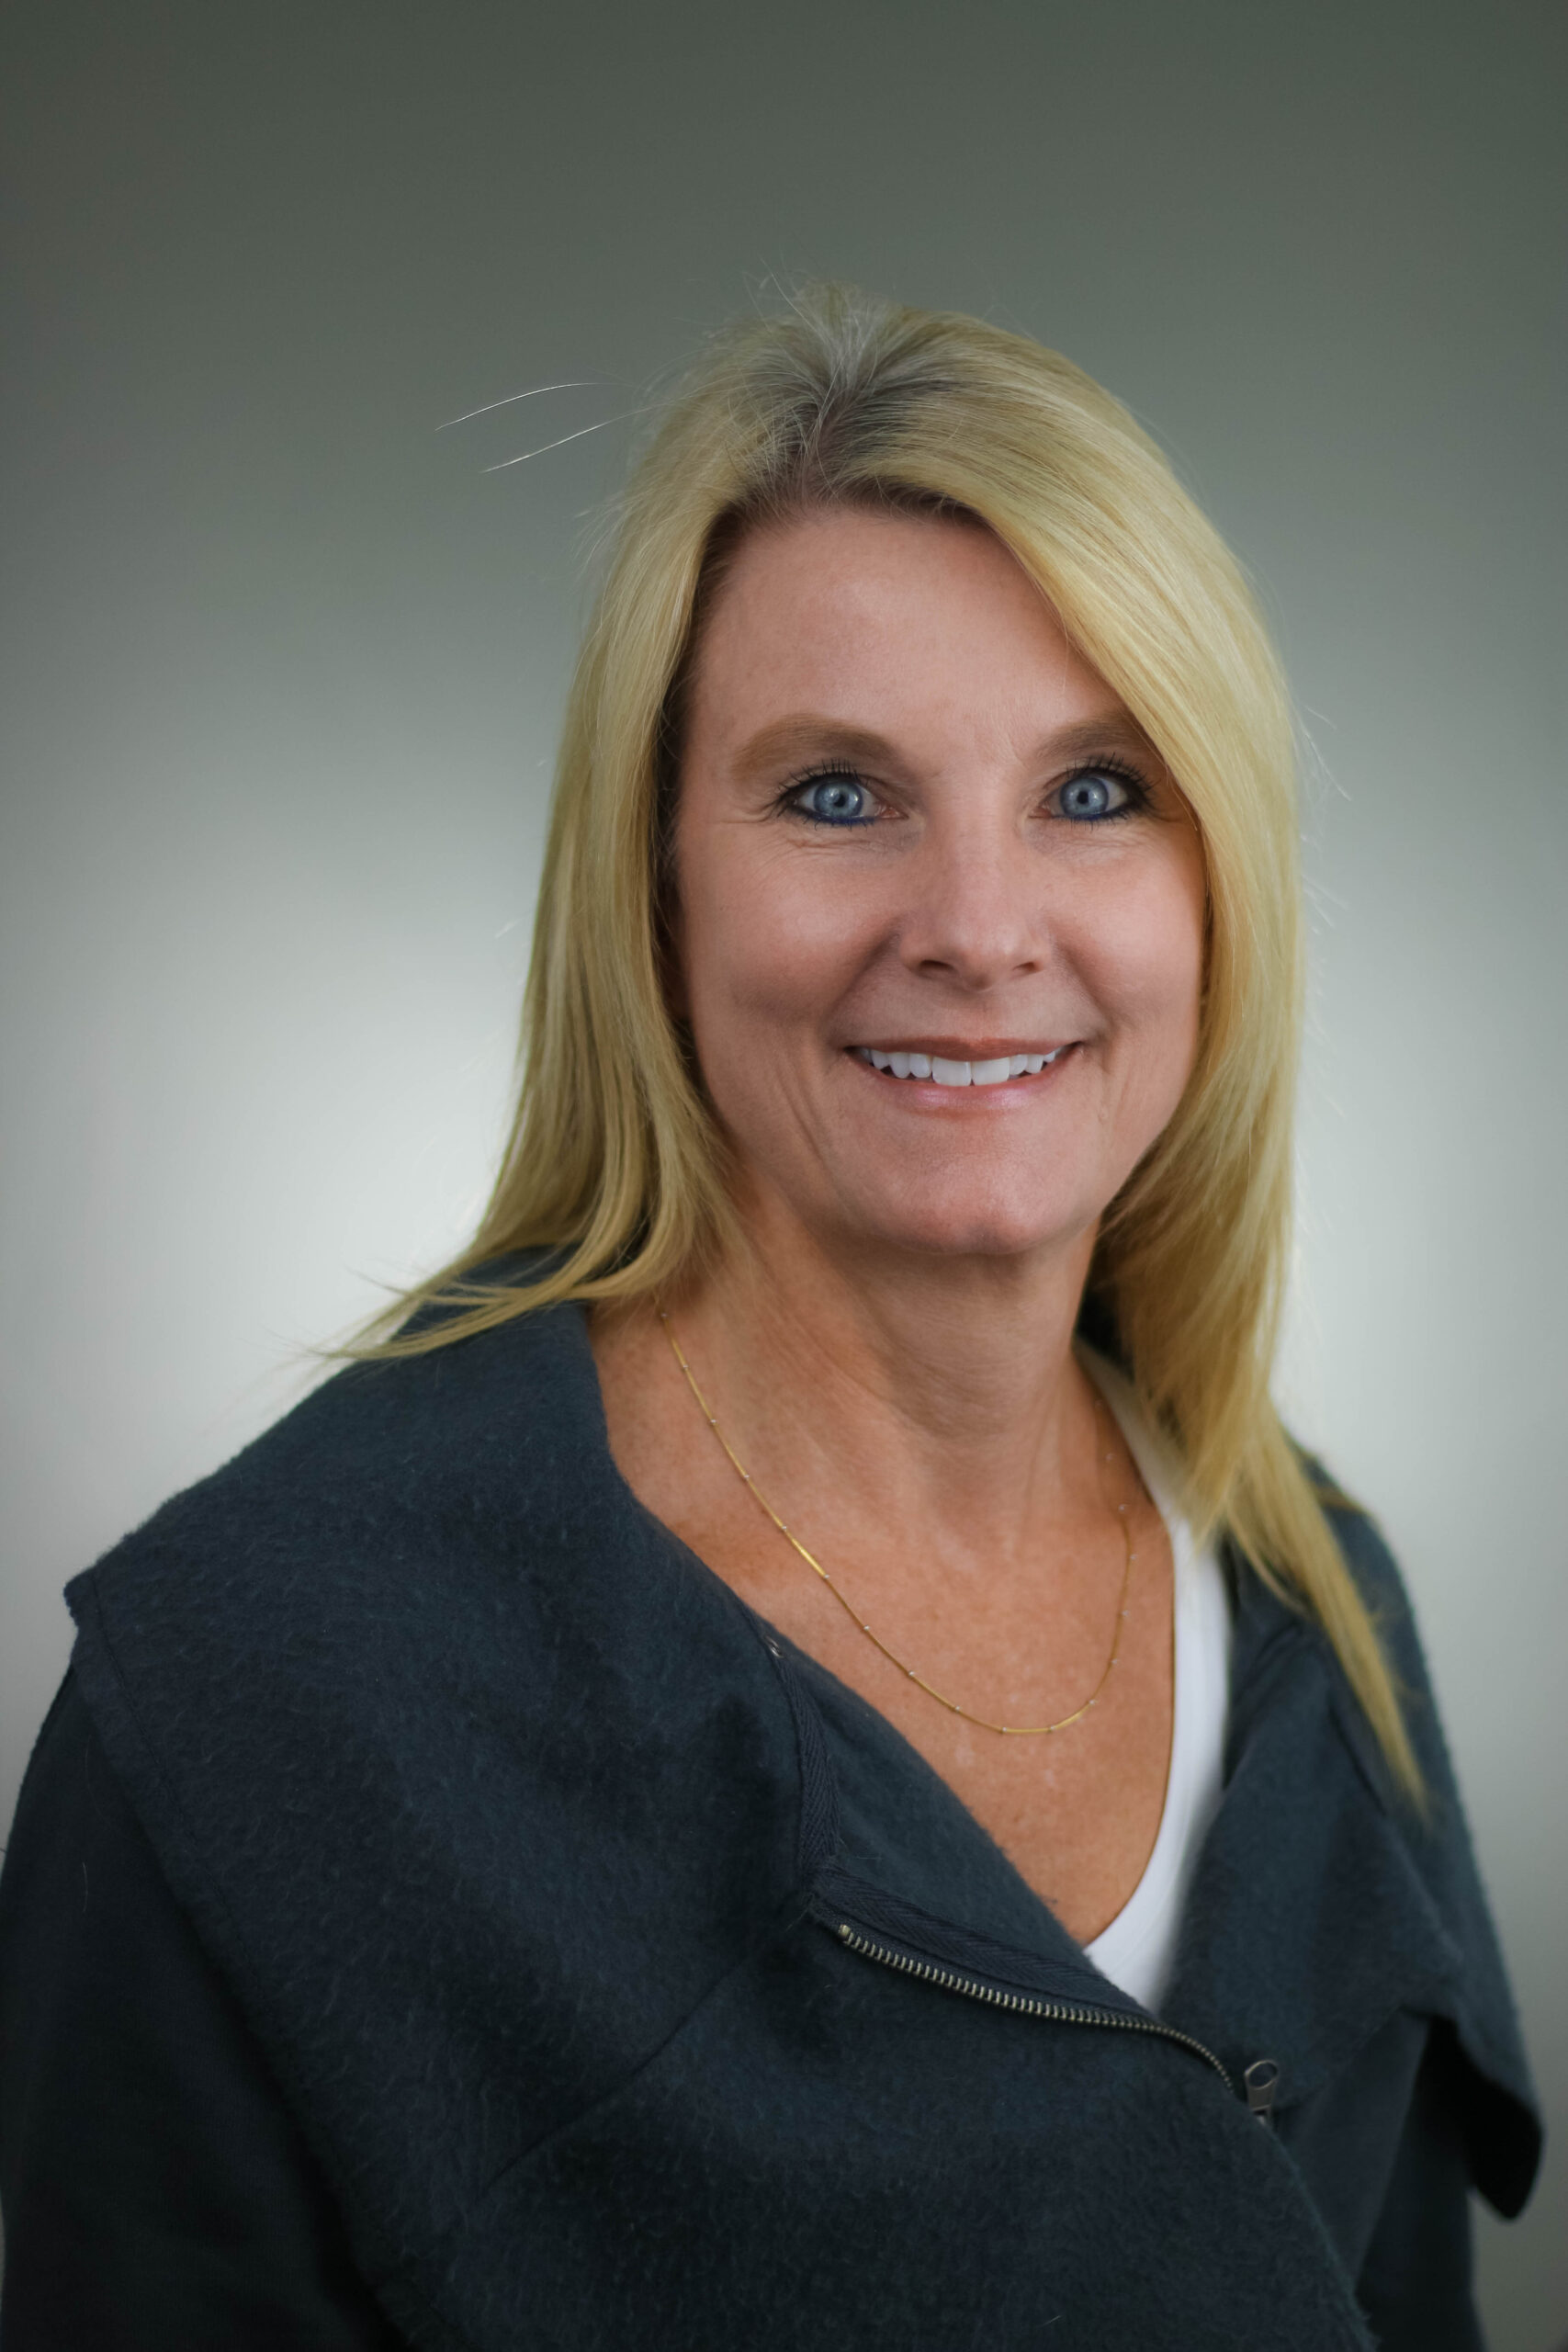 Eduro Healthcare Welcomes Lisa Kissell as Director of Compliance